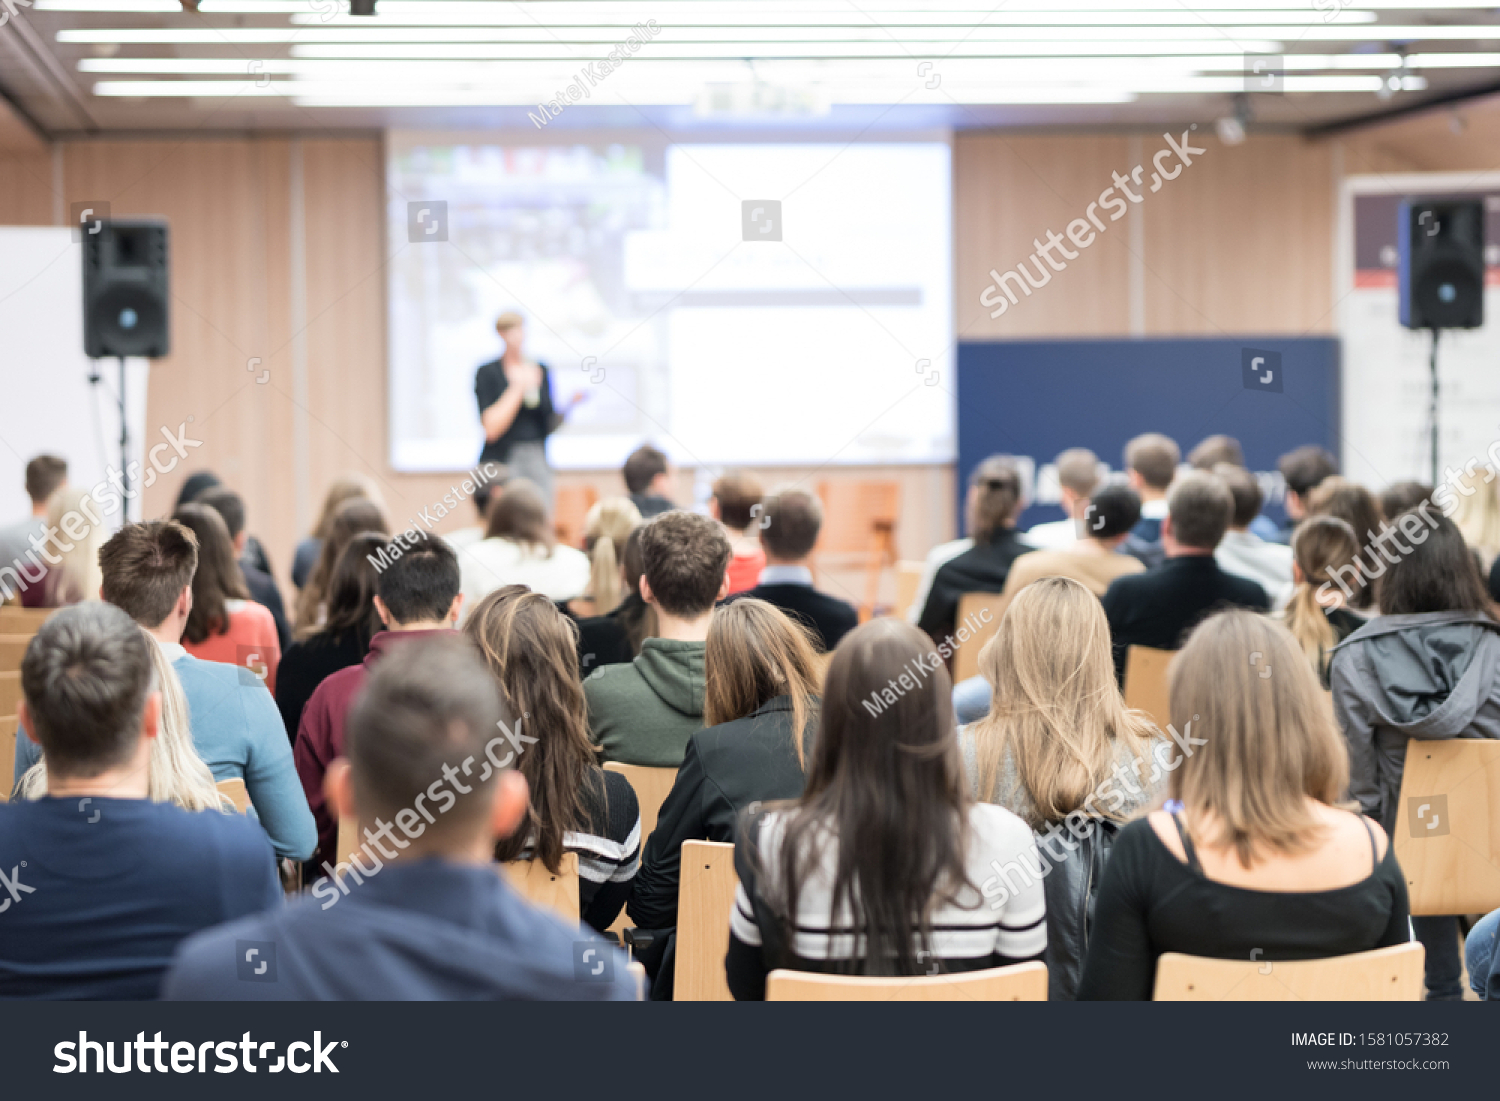 Business and entrepreneurship symposium. Female speaker giving a talk at business meeting. Audience in conference hall. Rear view of unrecognized participant in audience. #1581057382